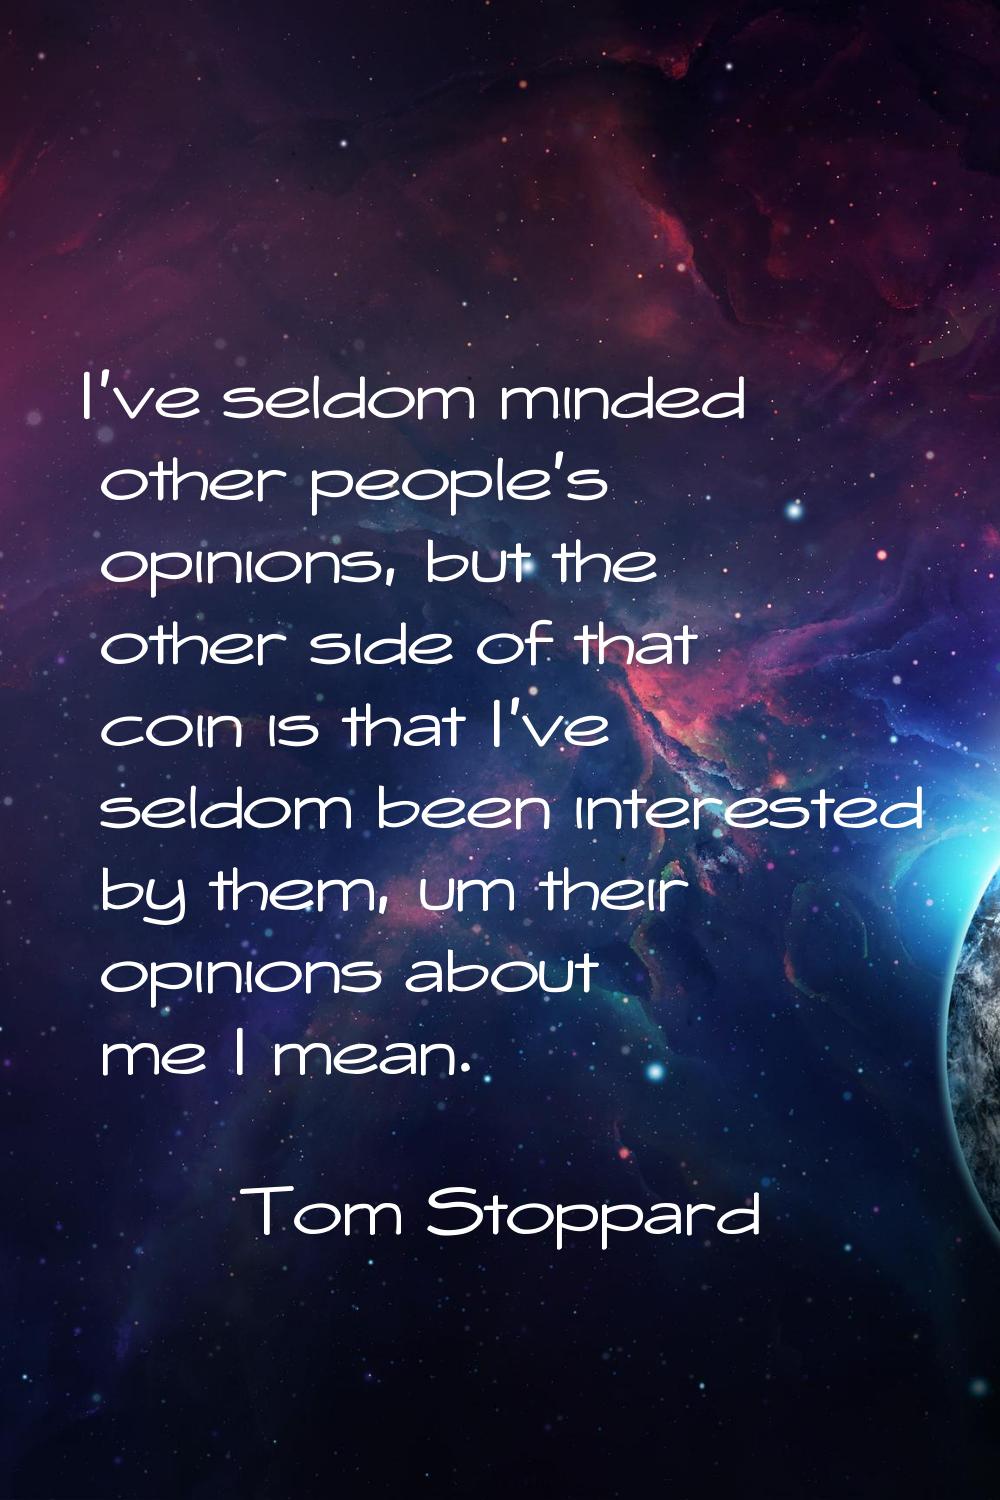 I've seldom minded other people's opinions, but the other side of that coin is that I've seldom bee